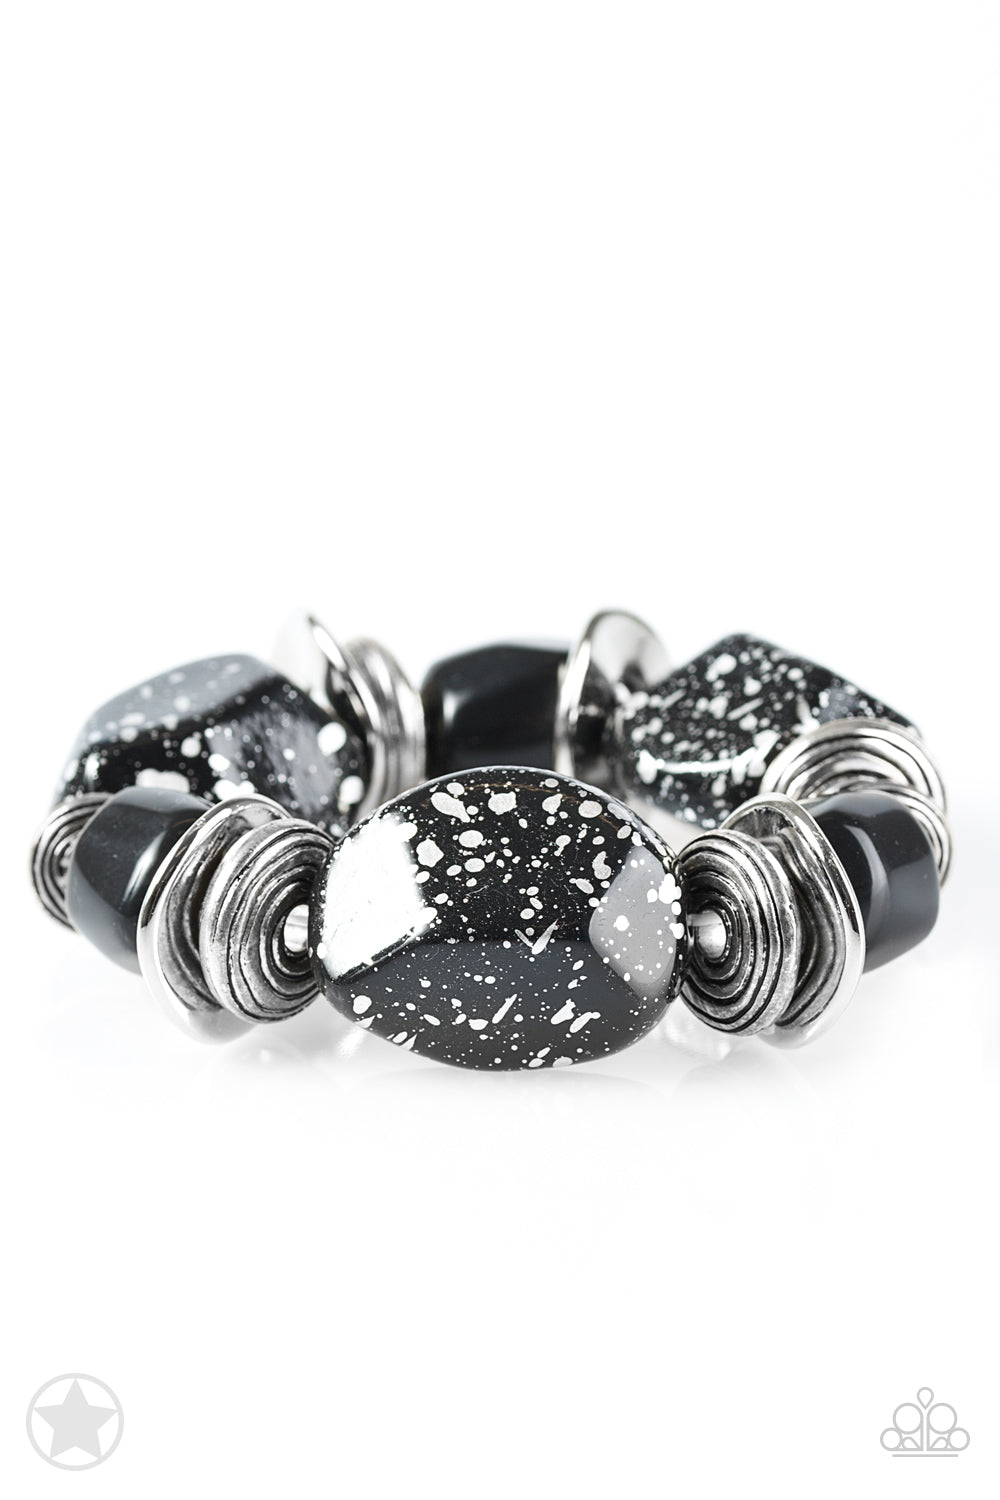 Chunky black beads with speckles of silver and a gorgeous glazed finish are threaded along a stretchy band with thick silver rings.